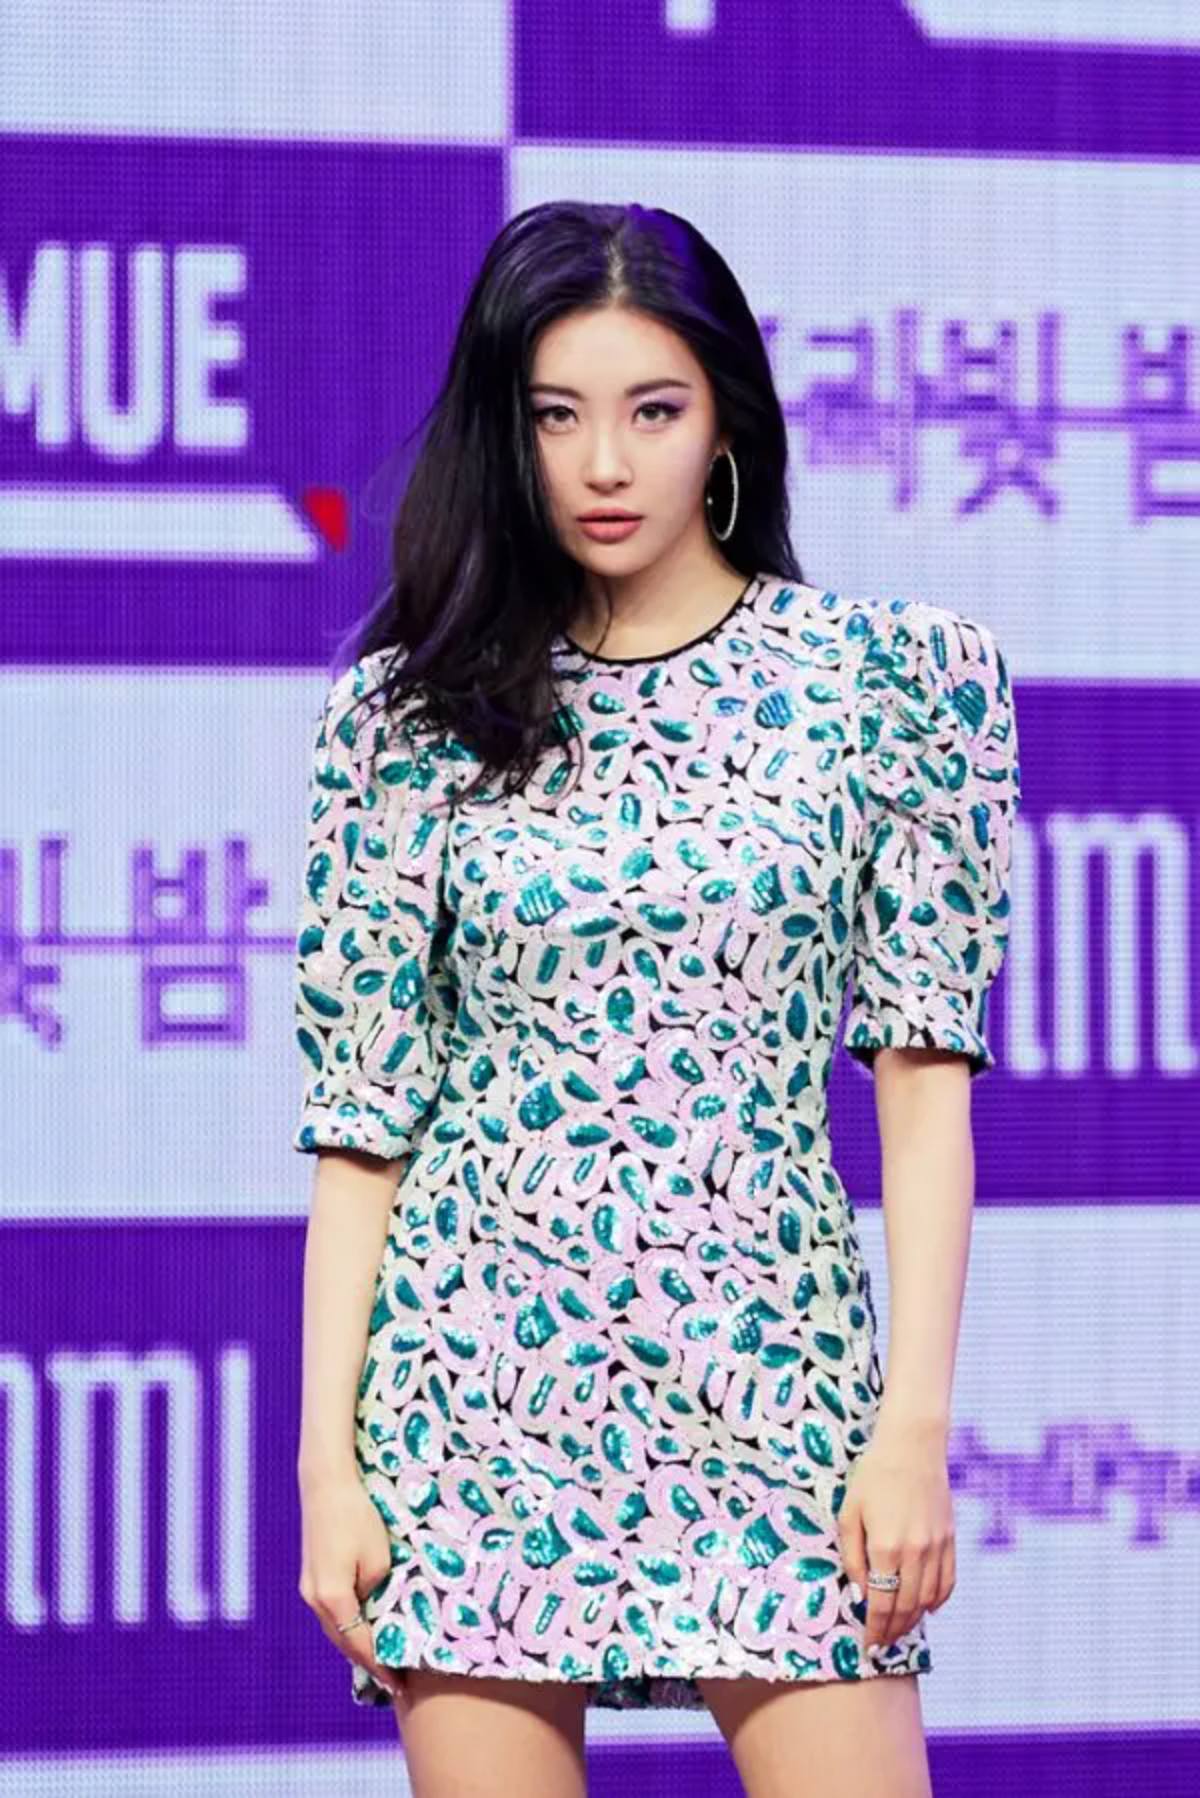 Sunmi fined a 40-year-old Malicious Commenter - Vicious comments are very vulgar